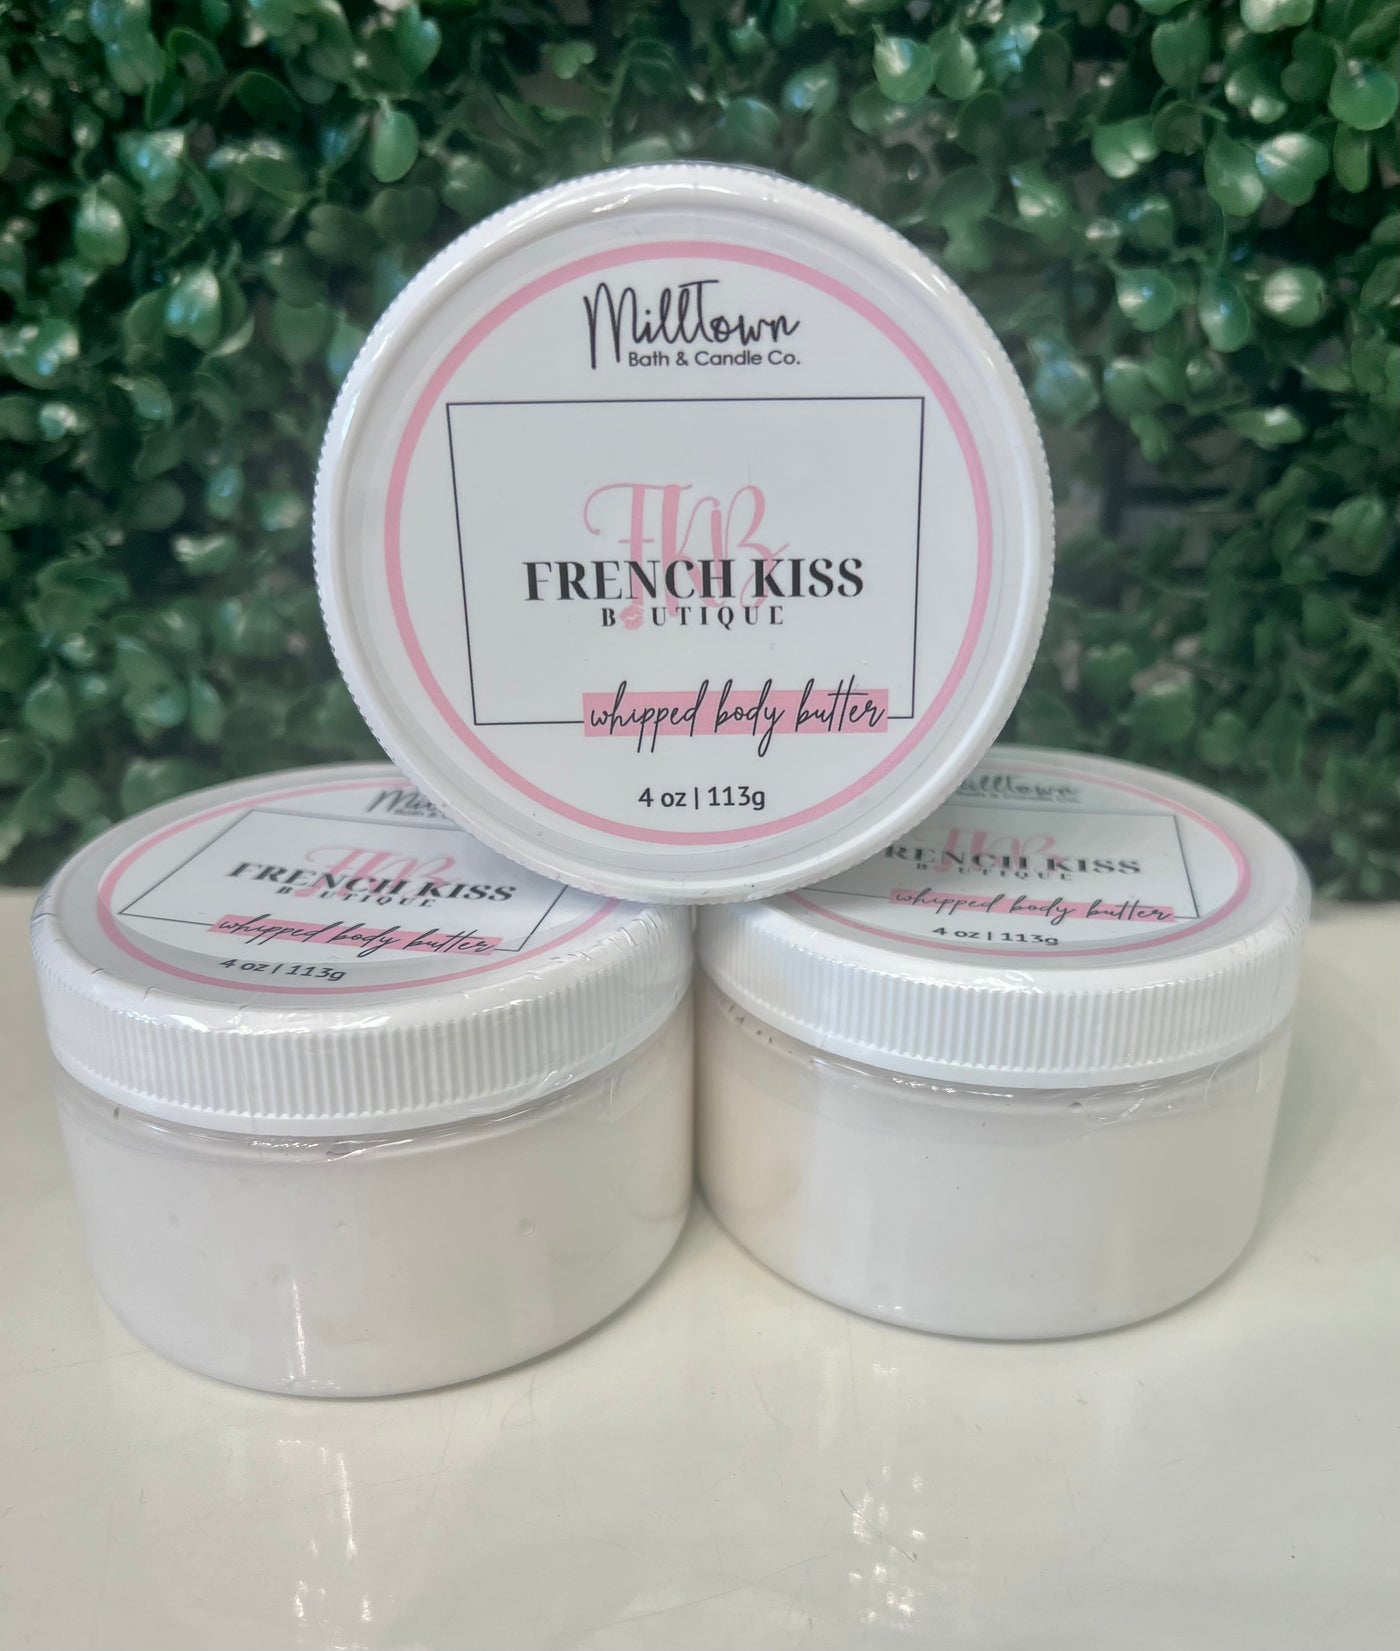 FRENCH KISS EXCLUSIVE BODY BUTTER